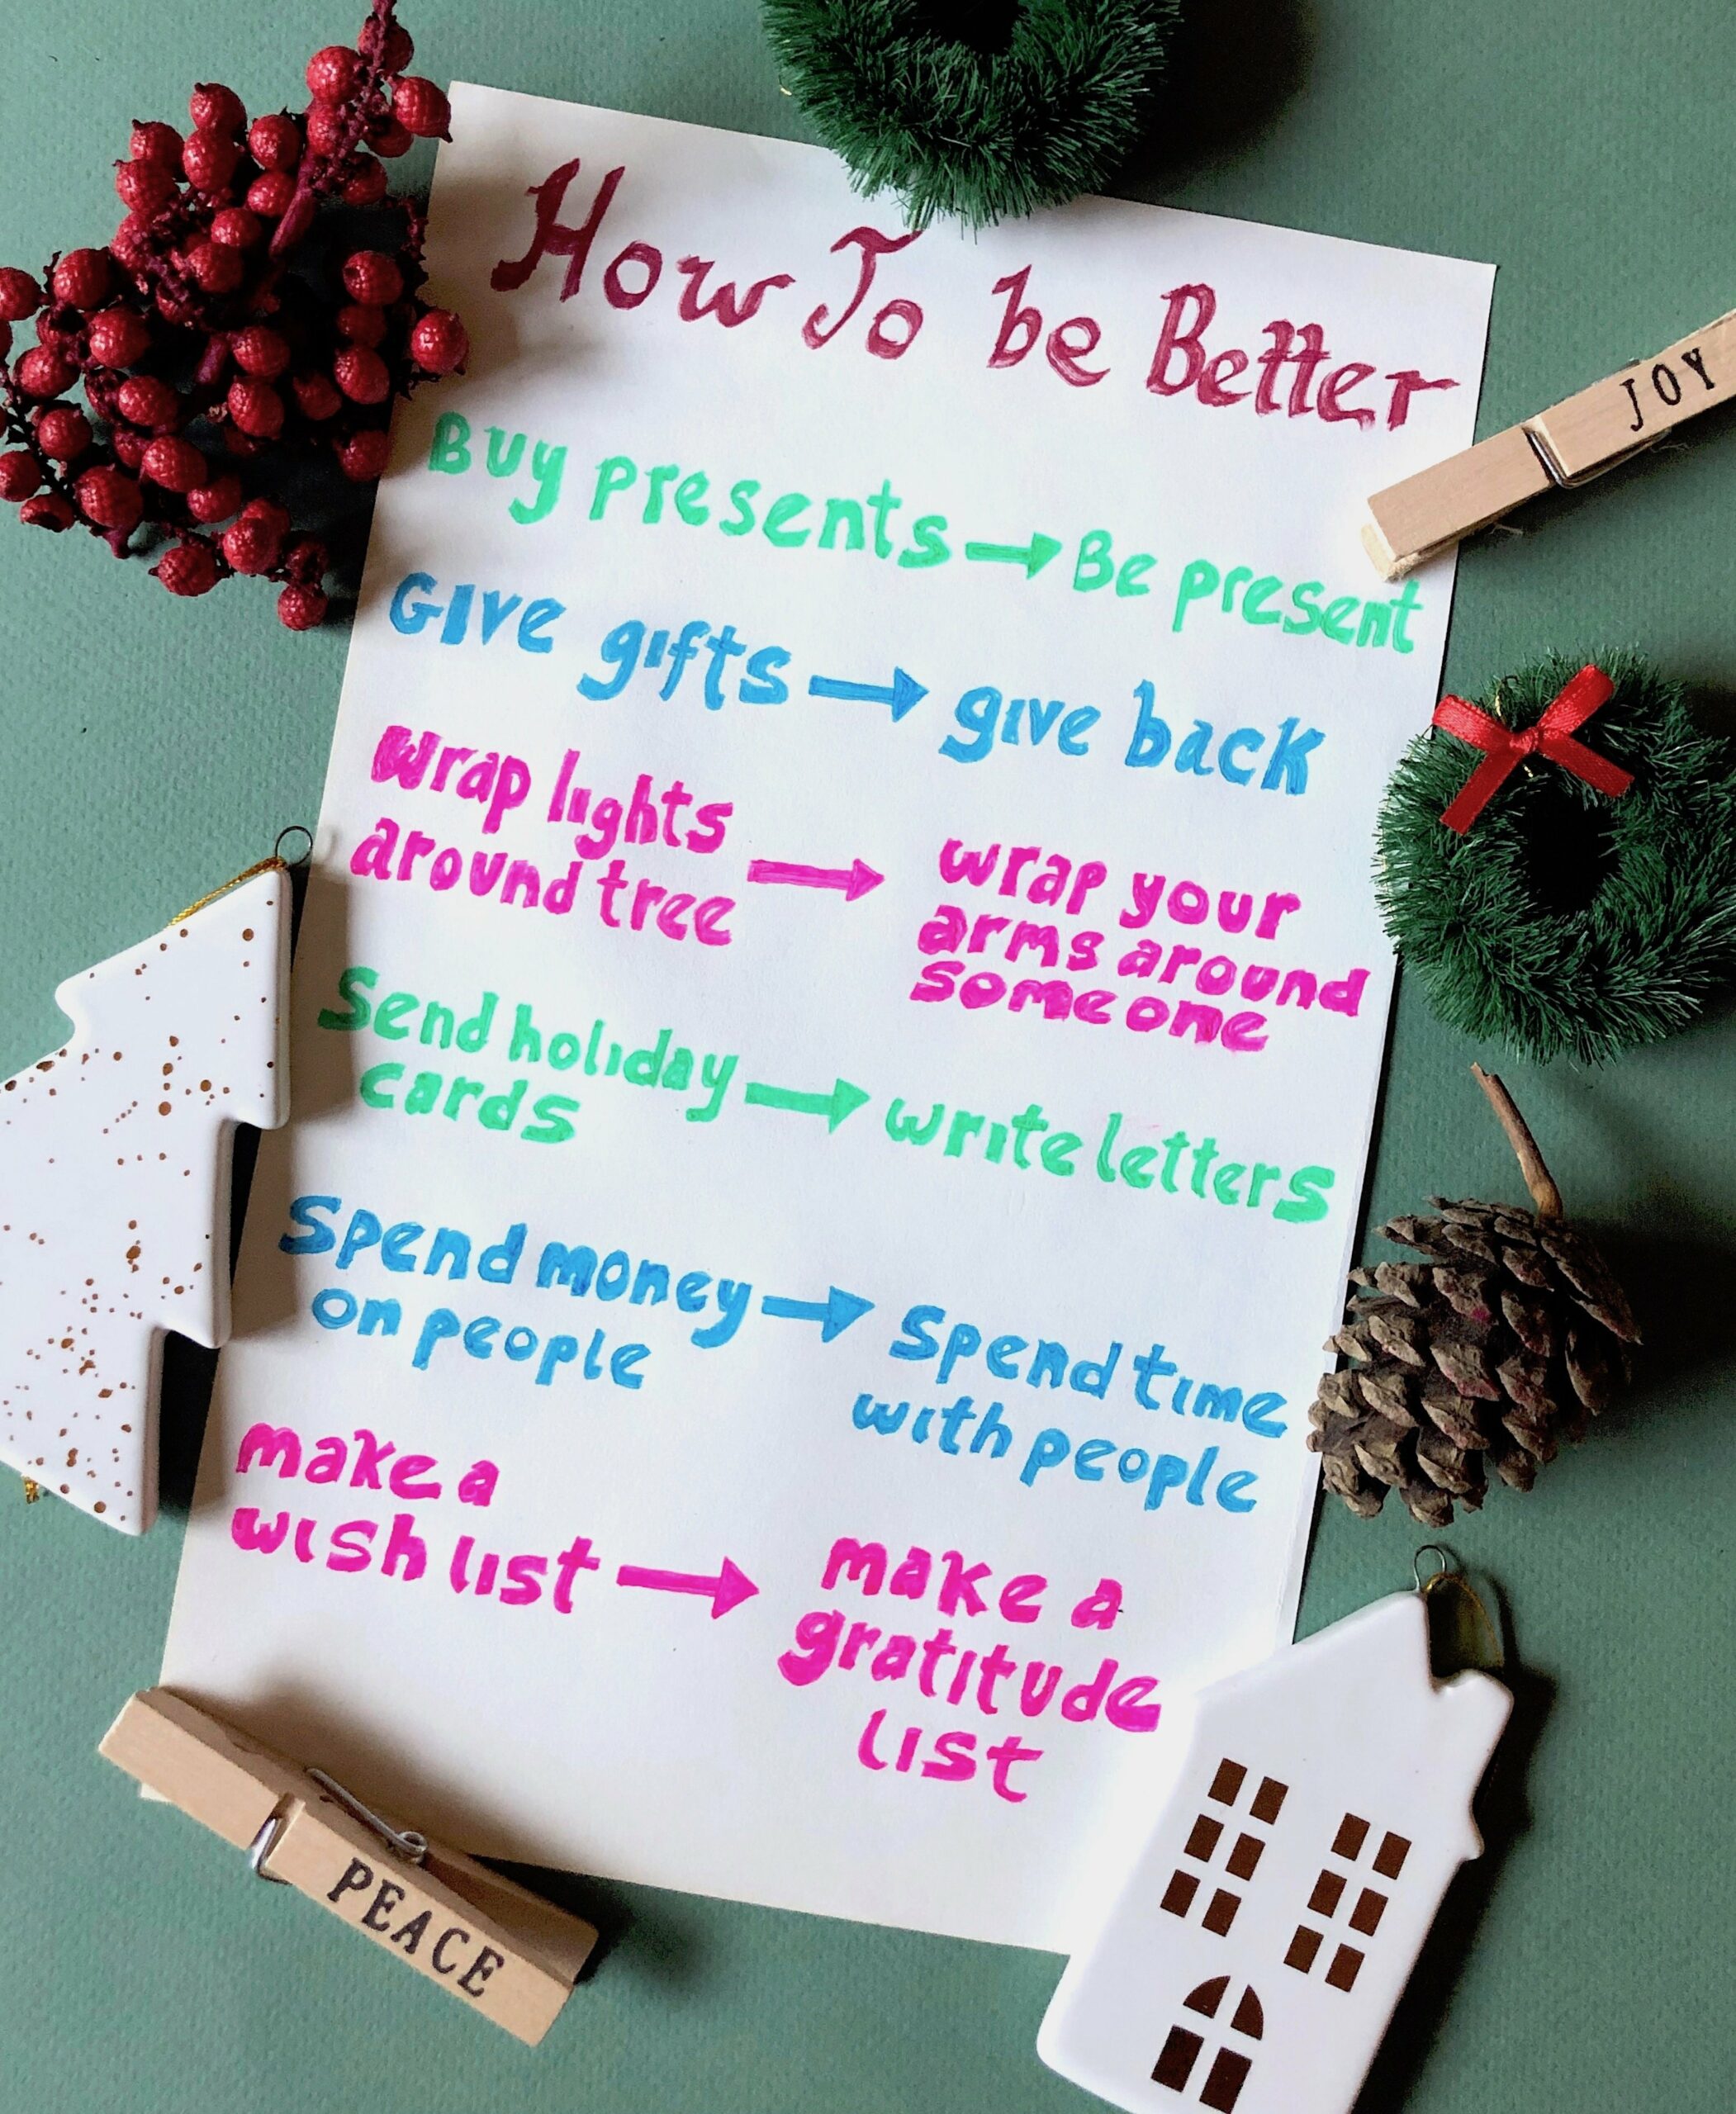 ways to be a better person this holiday season, mindfulness tips, holiday tips, how to be better, holiday wellness tips